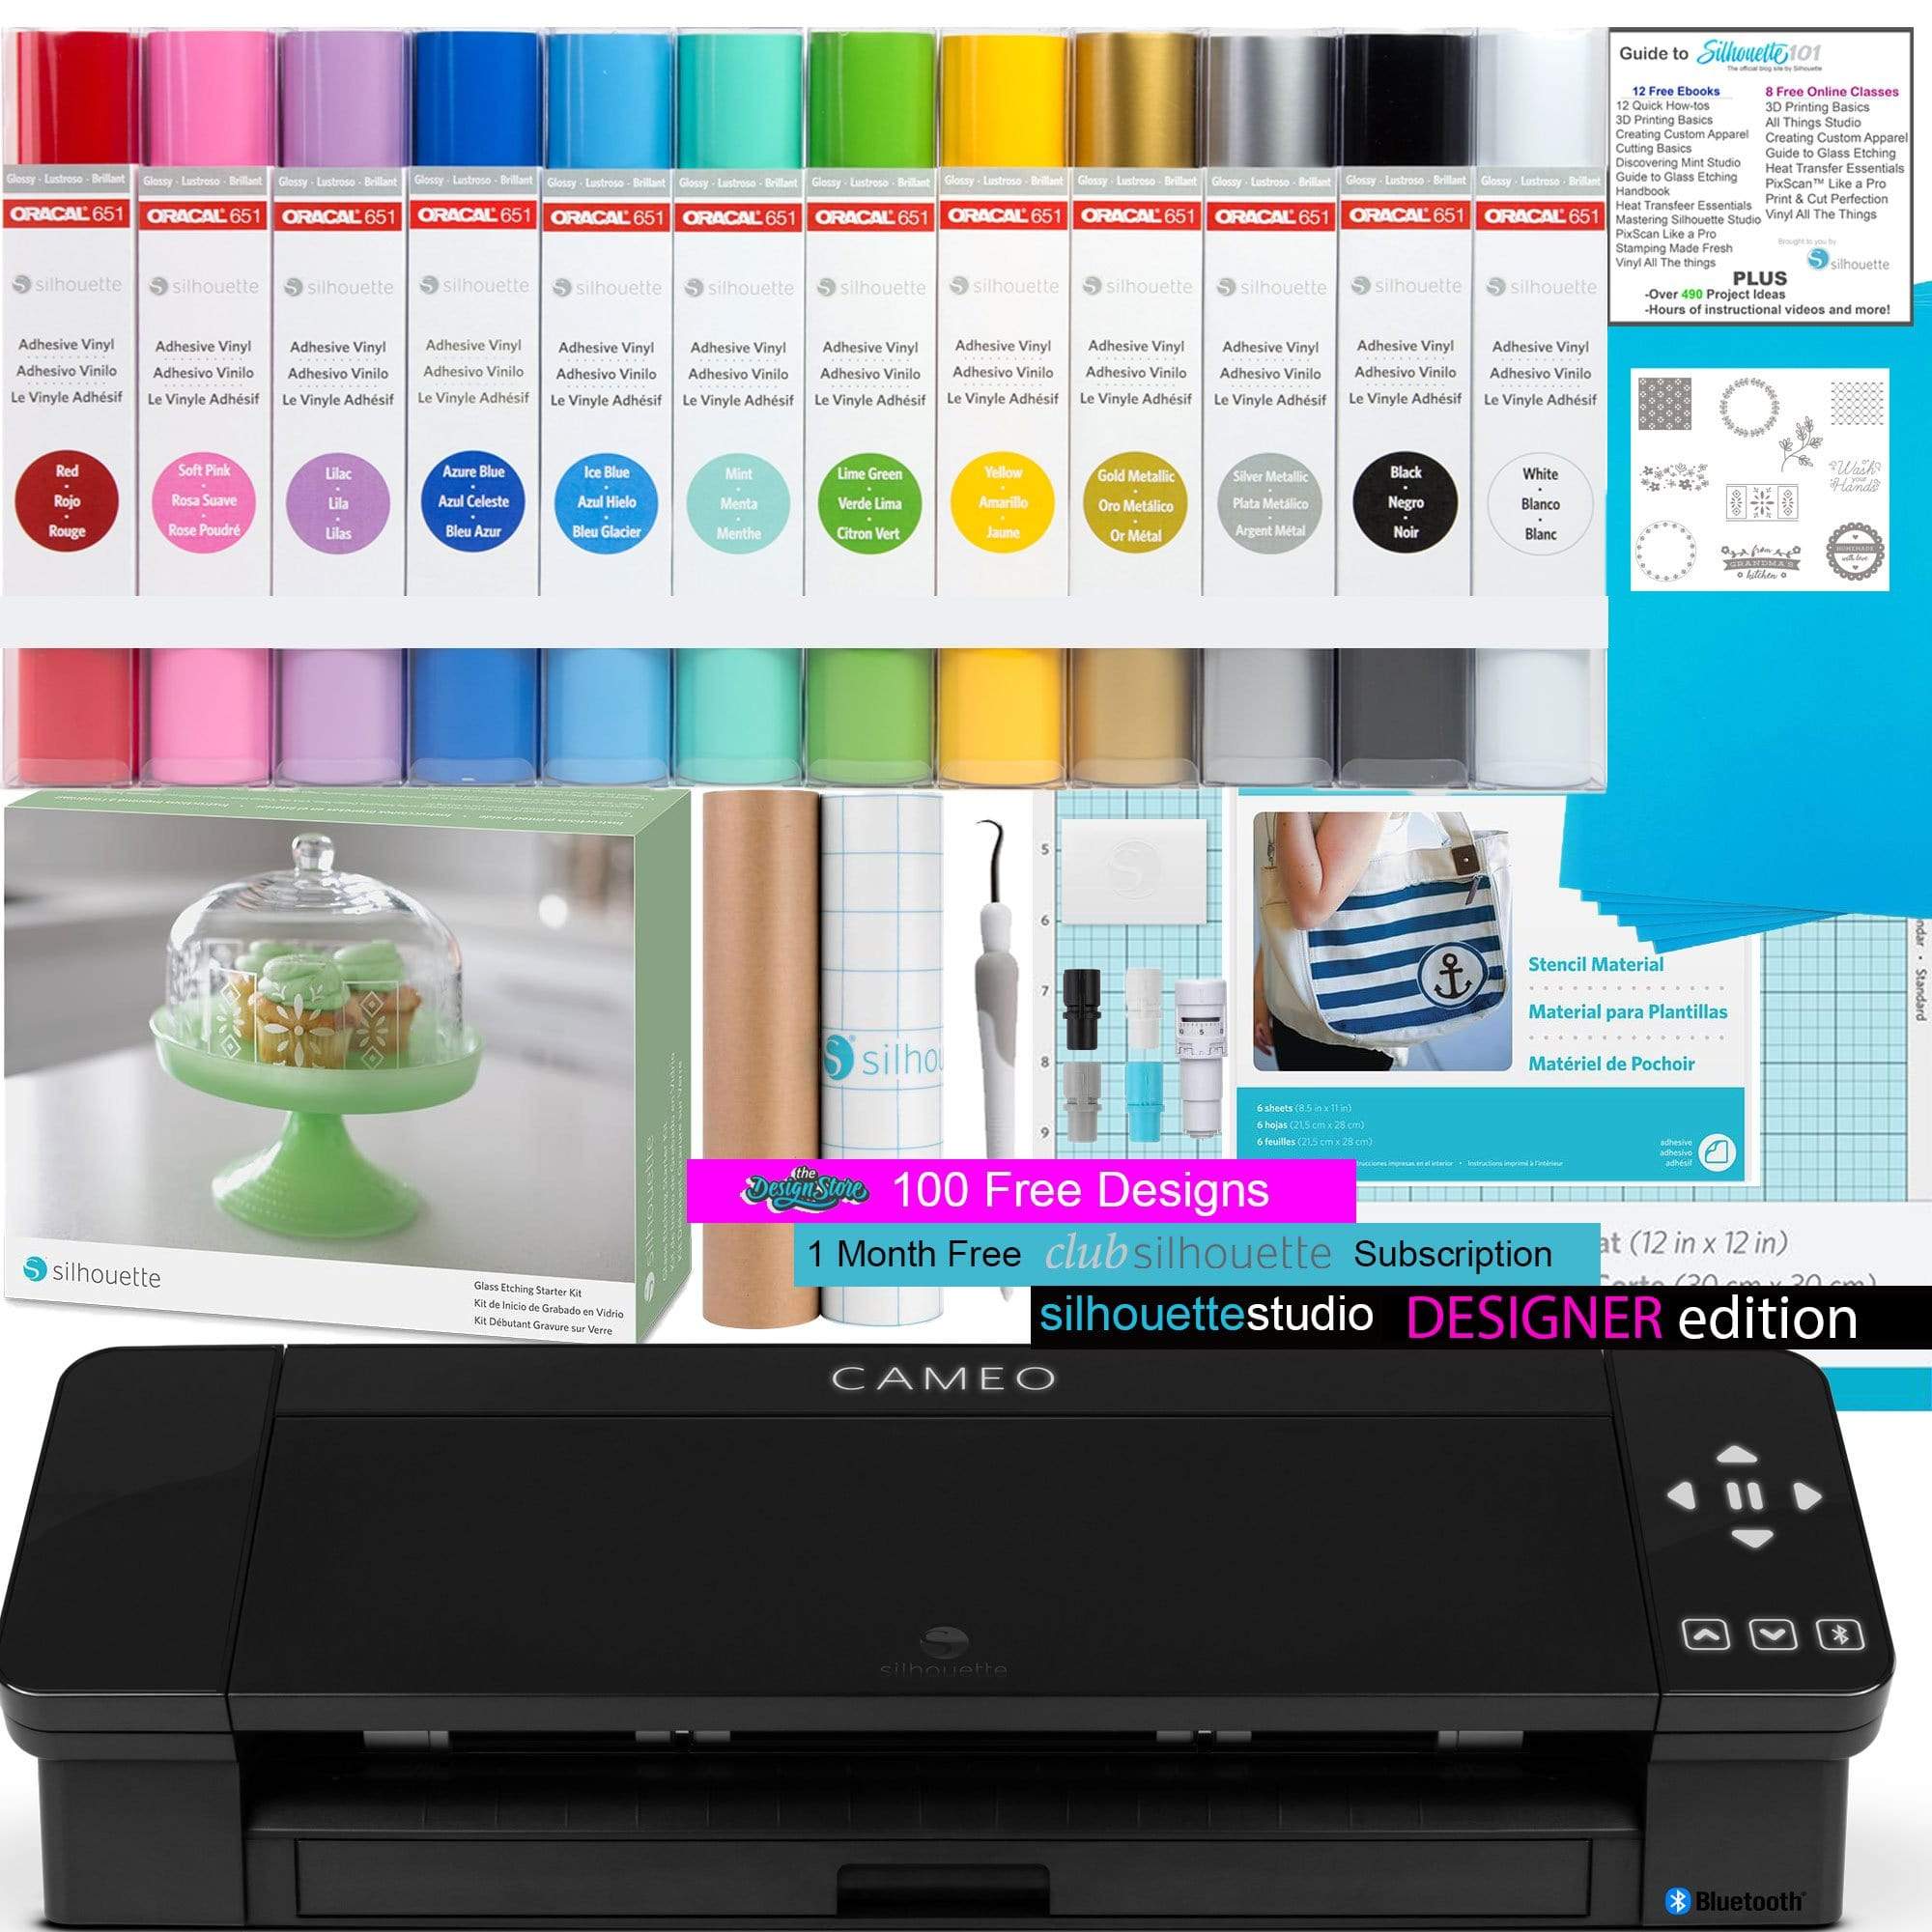 Silhouette America Silhouette Cameo 4 Bundle for working with Glass- Includes Etching cream, 12 pack of Oracal Vinyl, Stencil Material, Upgraded Software-Black Edition